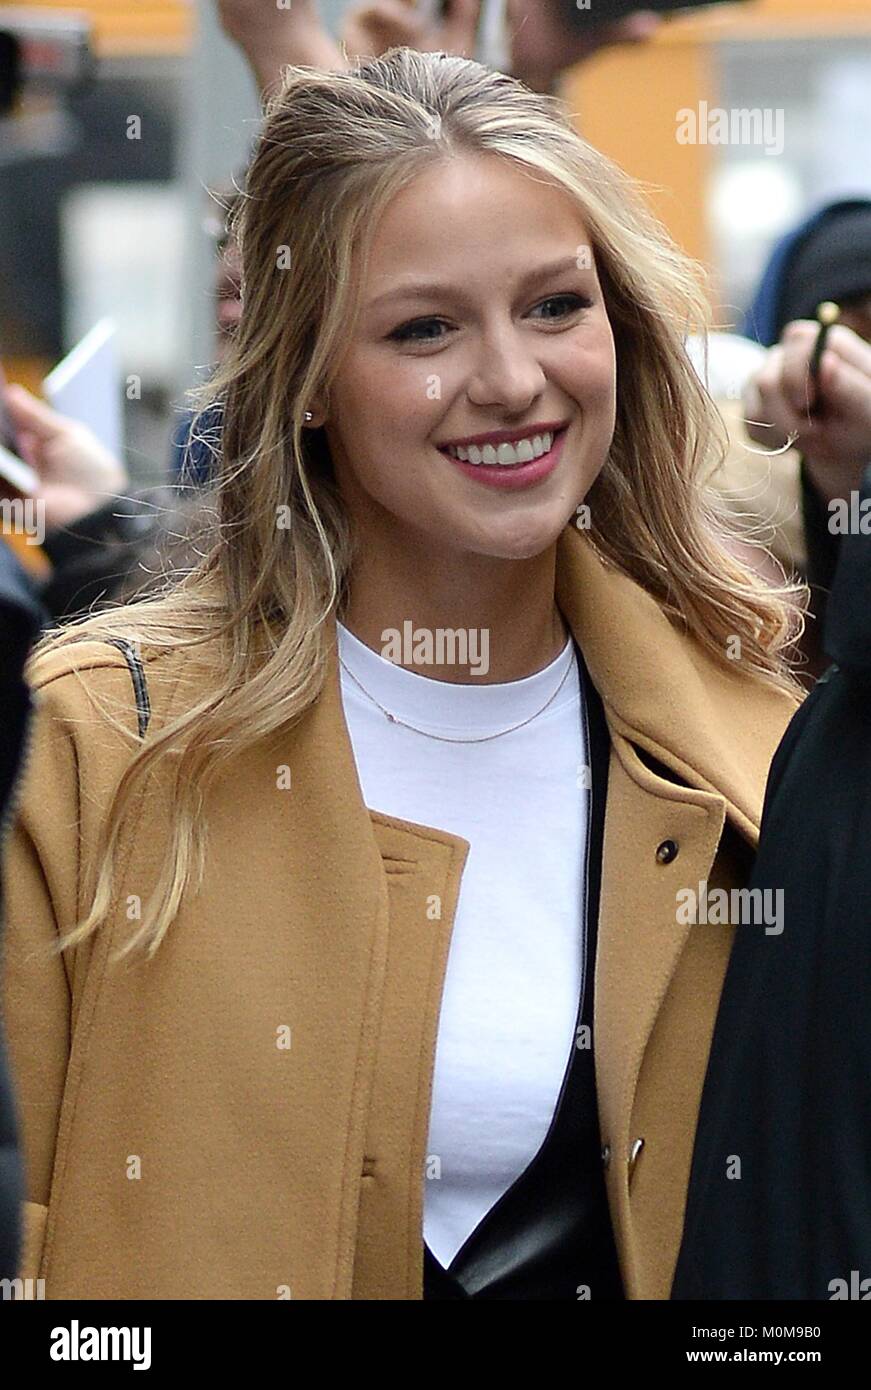 New York, NY, USA. 22nd Jan, 2018. Melissa Benoist out and about for  Celebrity Candids - MON, New York, NY January 22, 2018. Credit: Kristin  Callahan/Everett Collection/Alamy Live News Stock Photo - Alamy